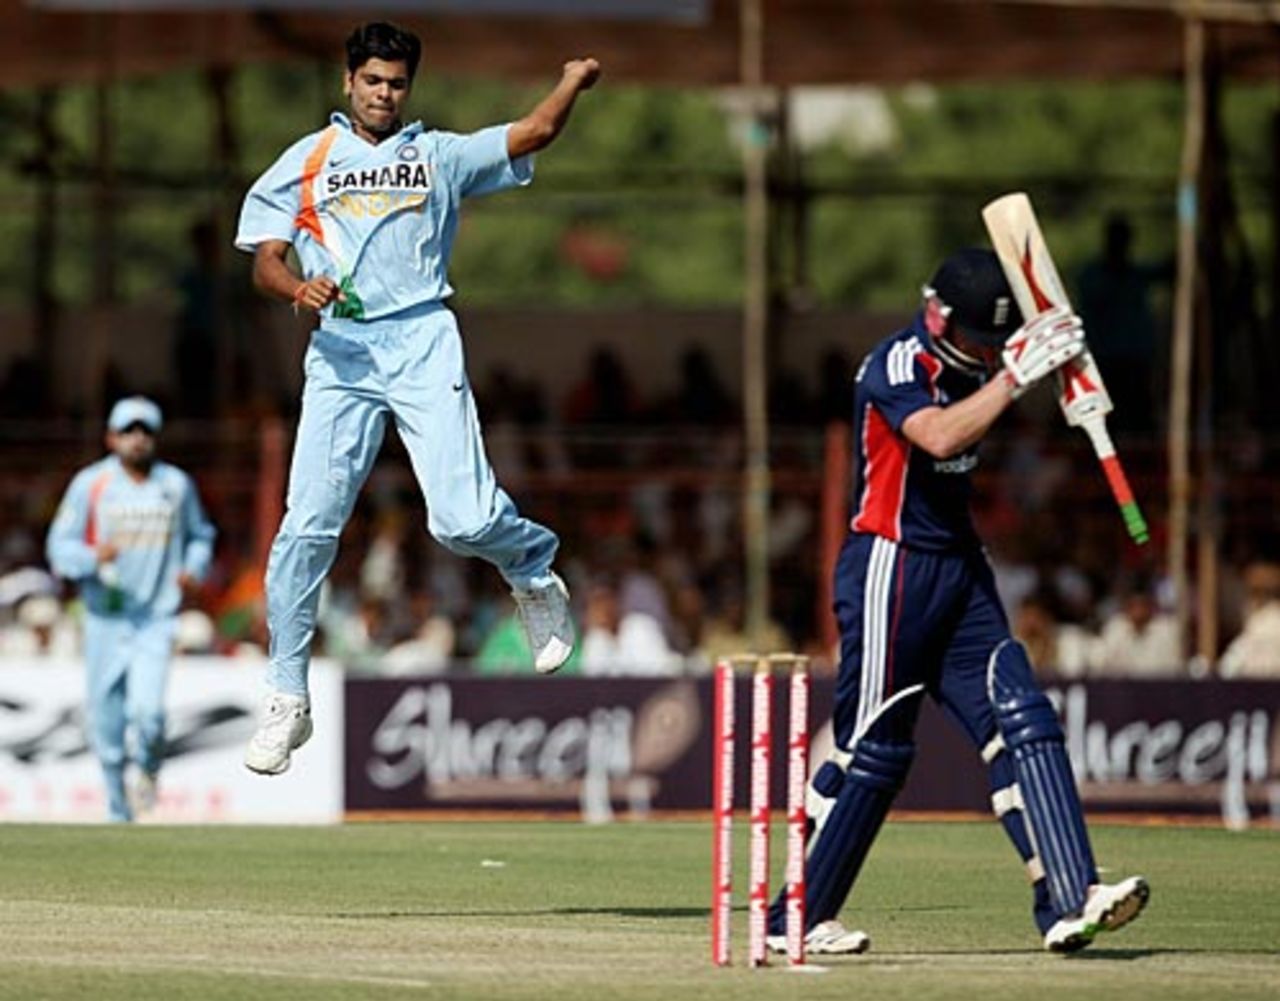 RP Singh leaps for joy after accounting for Paul Collingwood, India v England, 1st ODI, Rajkot, November 14, 2008